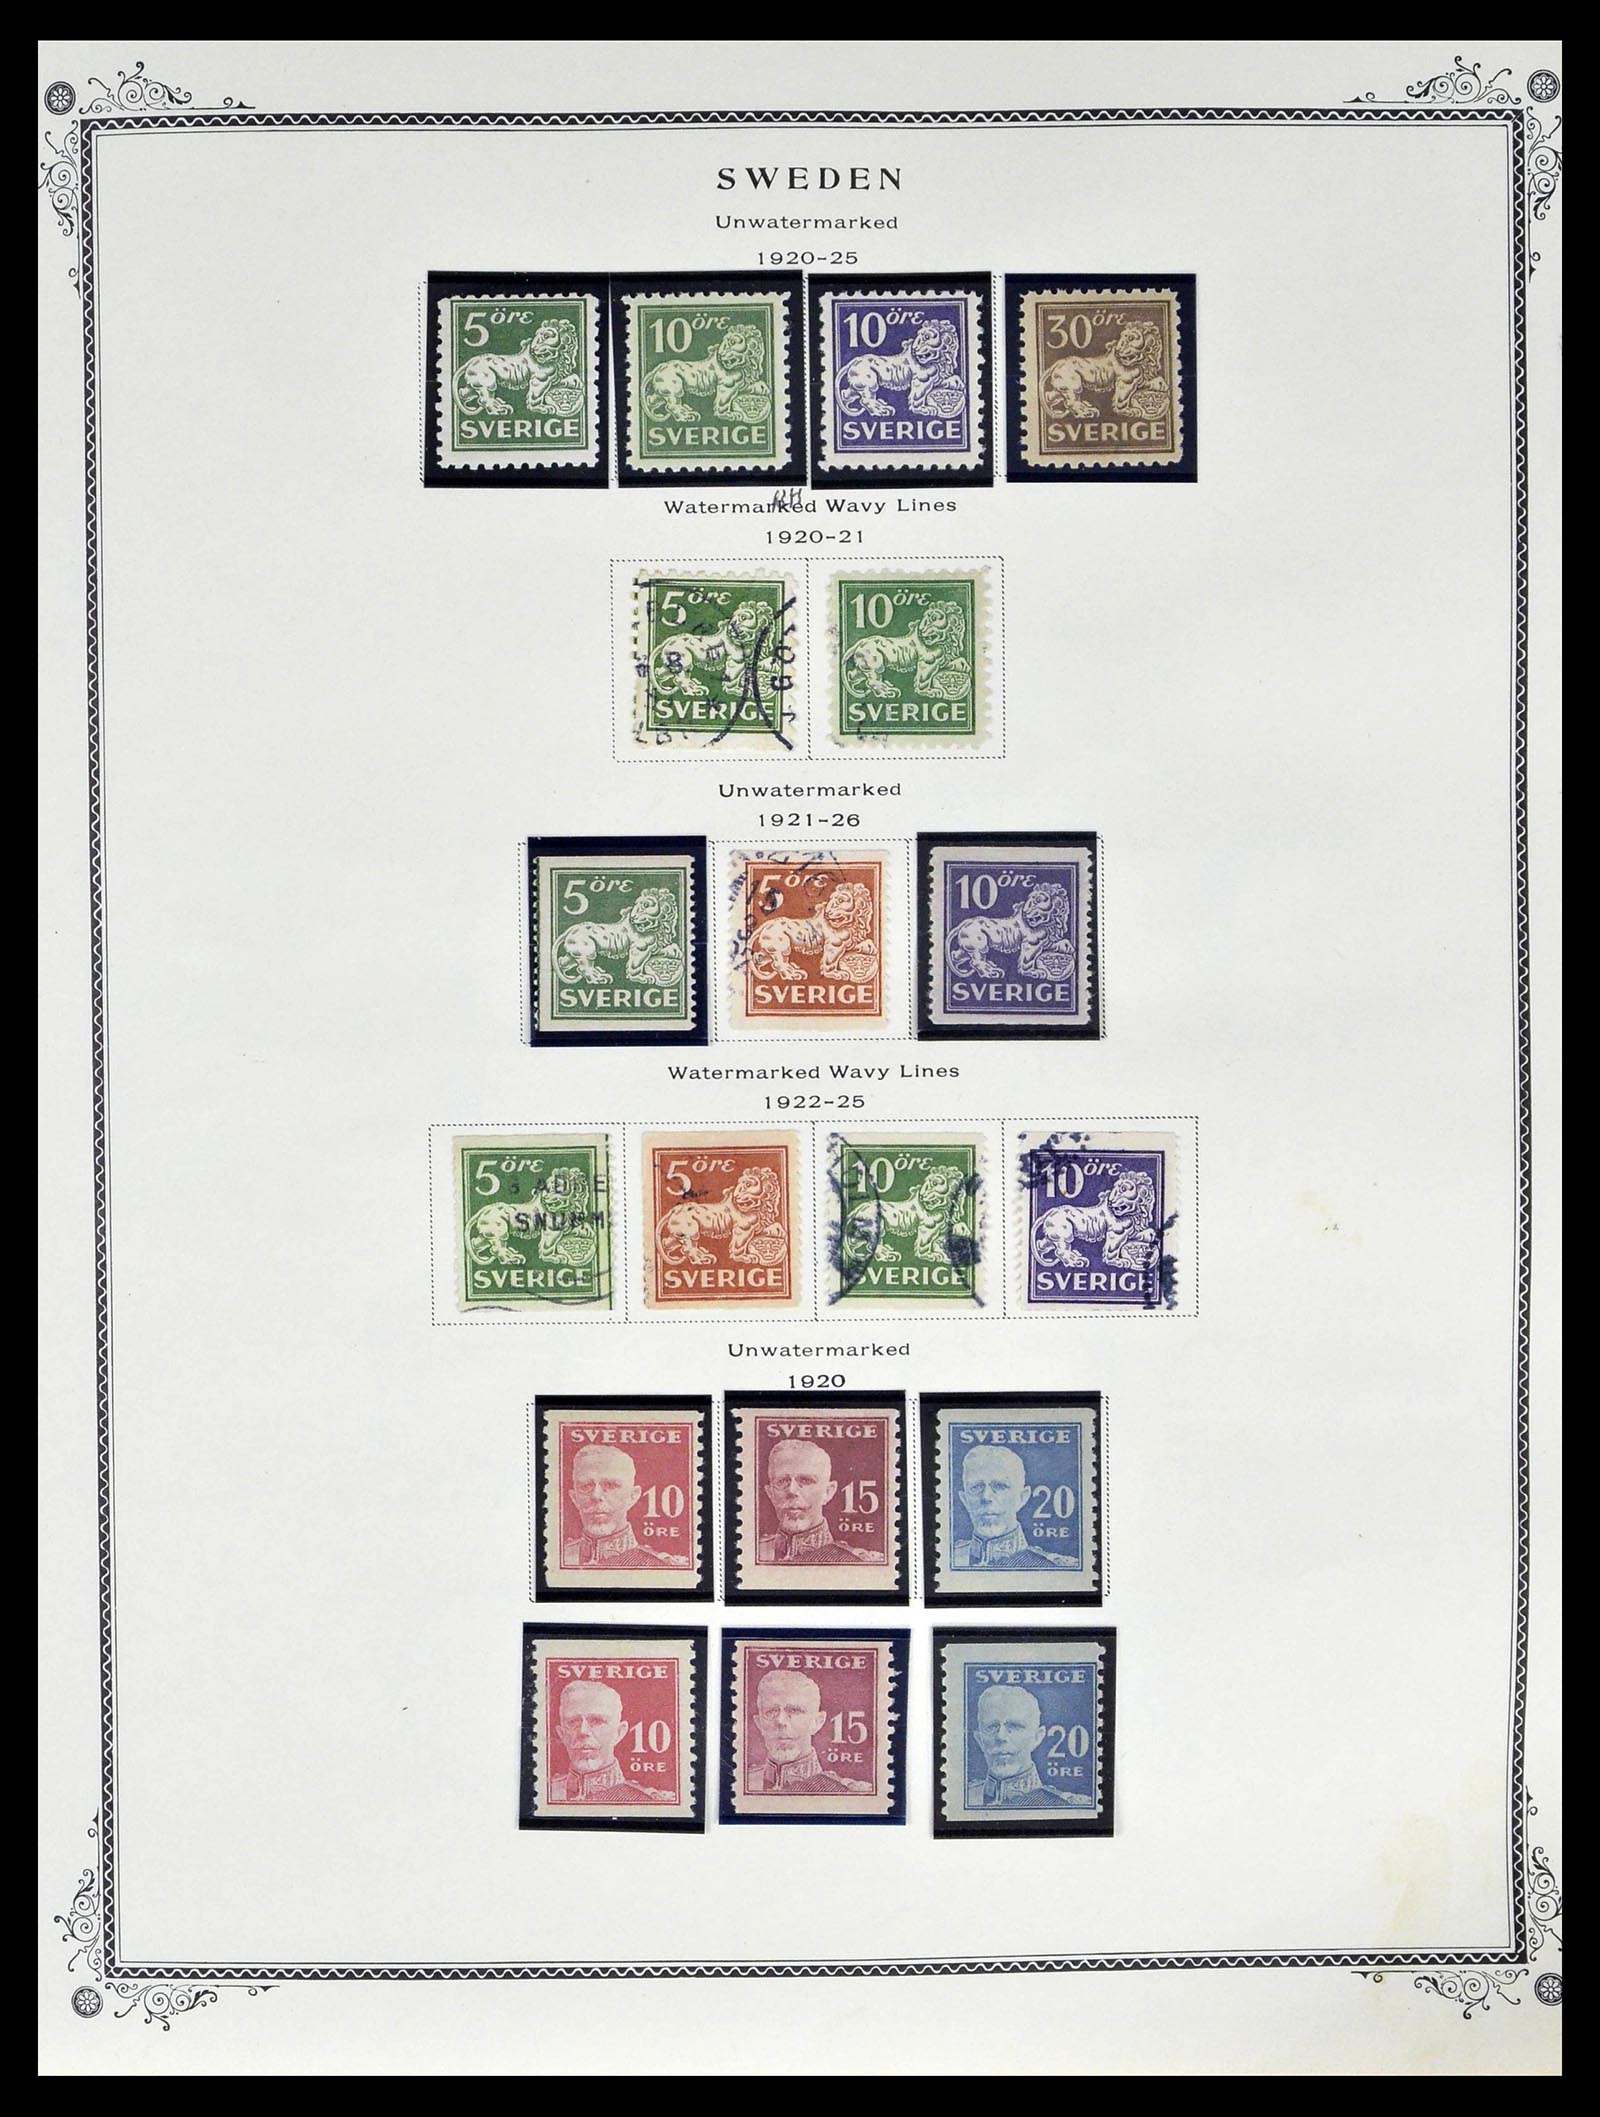 39179 0010 - Stamp collection 39179 Sweden 1855-1997.